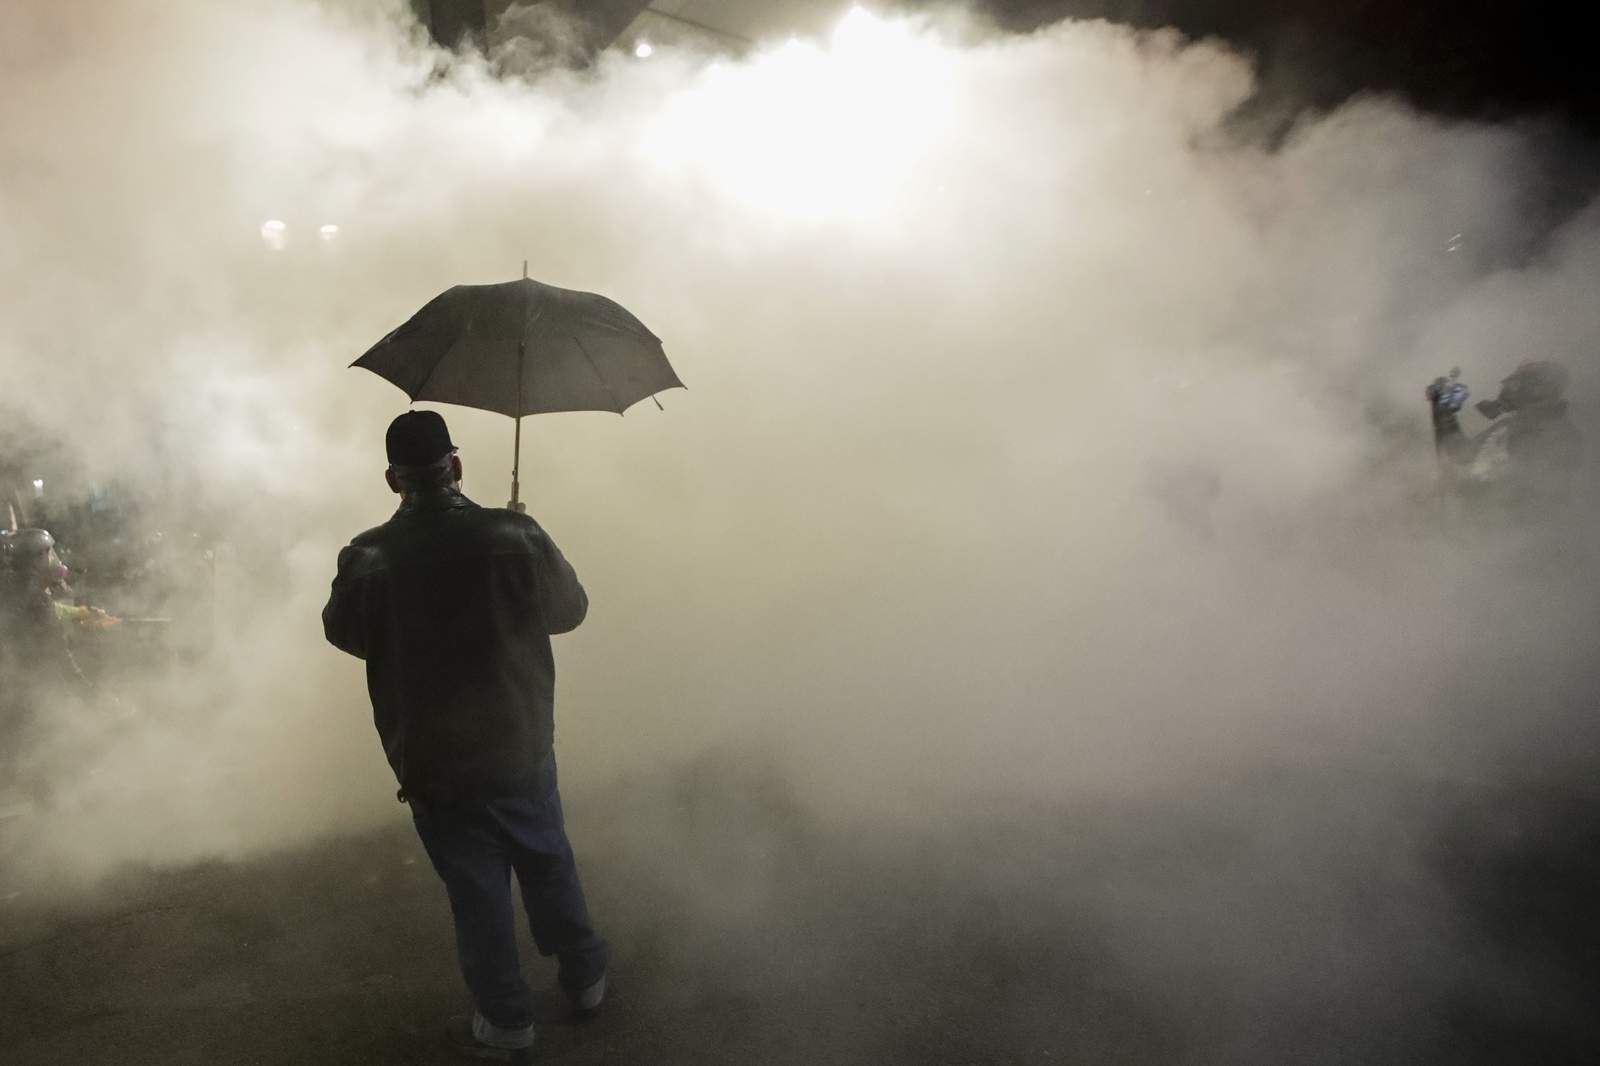 Tear gas at Portland protests raises concern about pollution